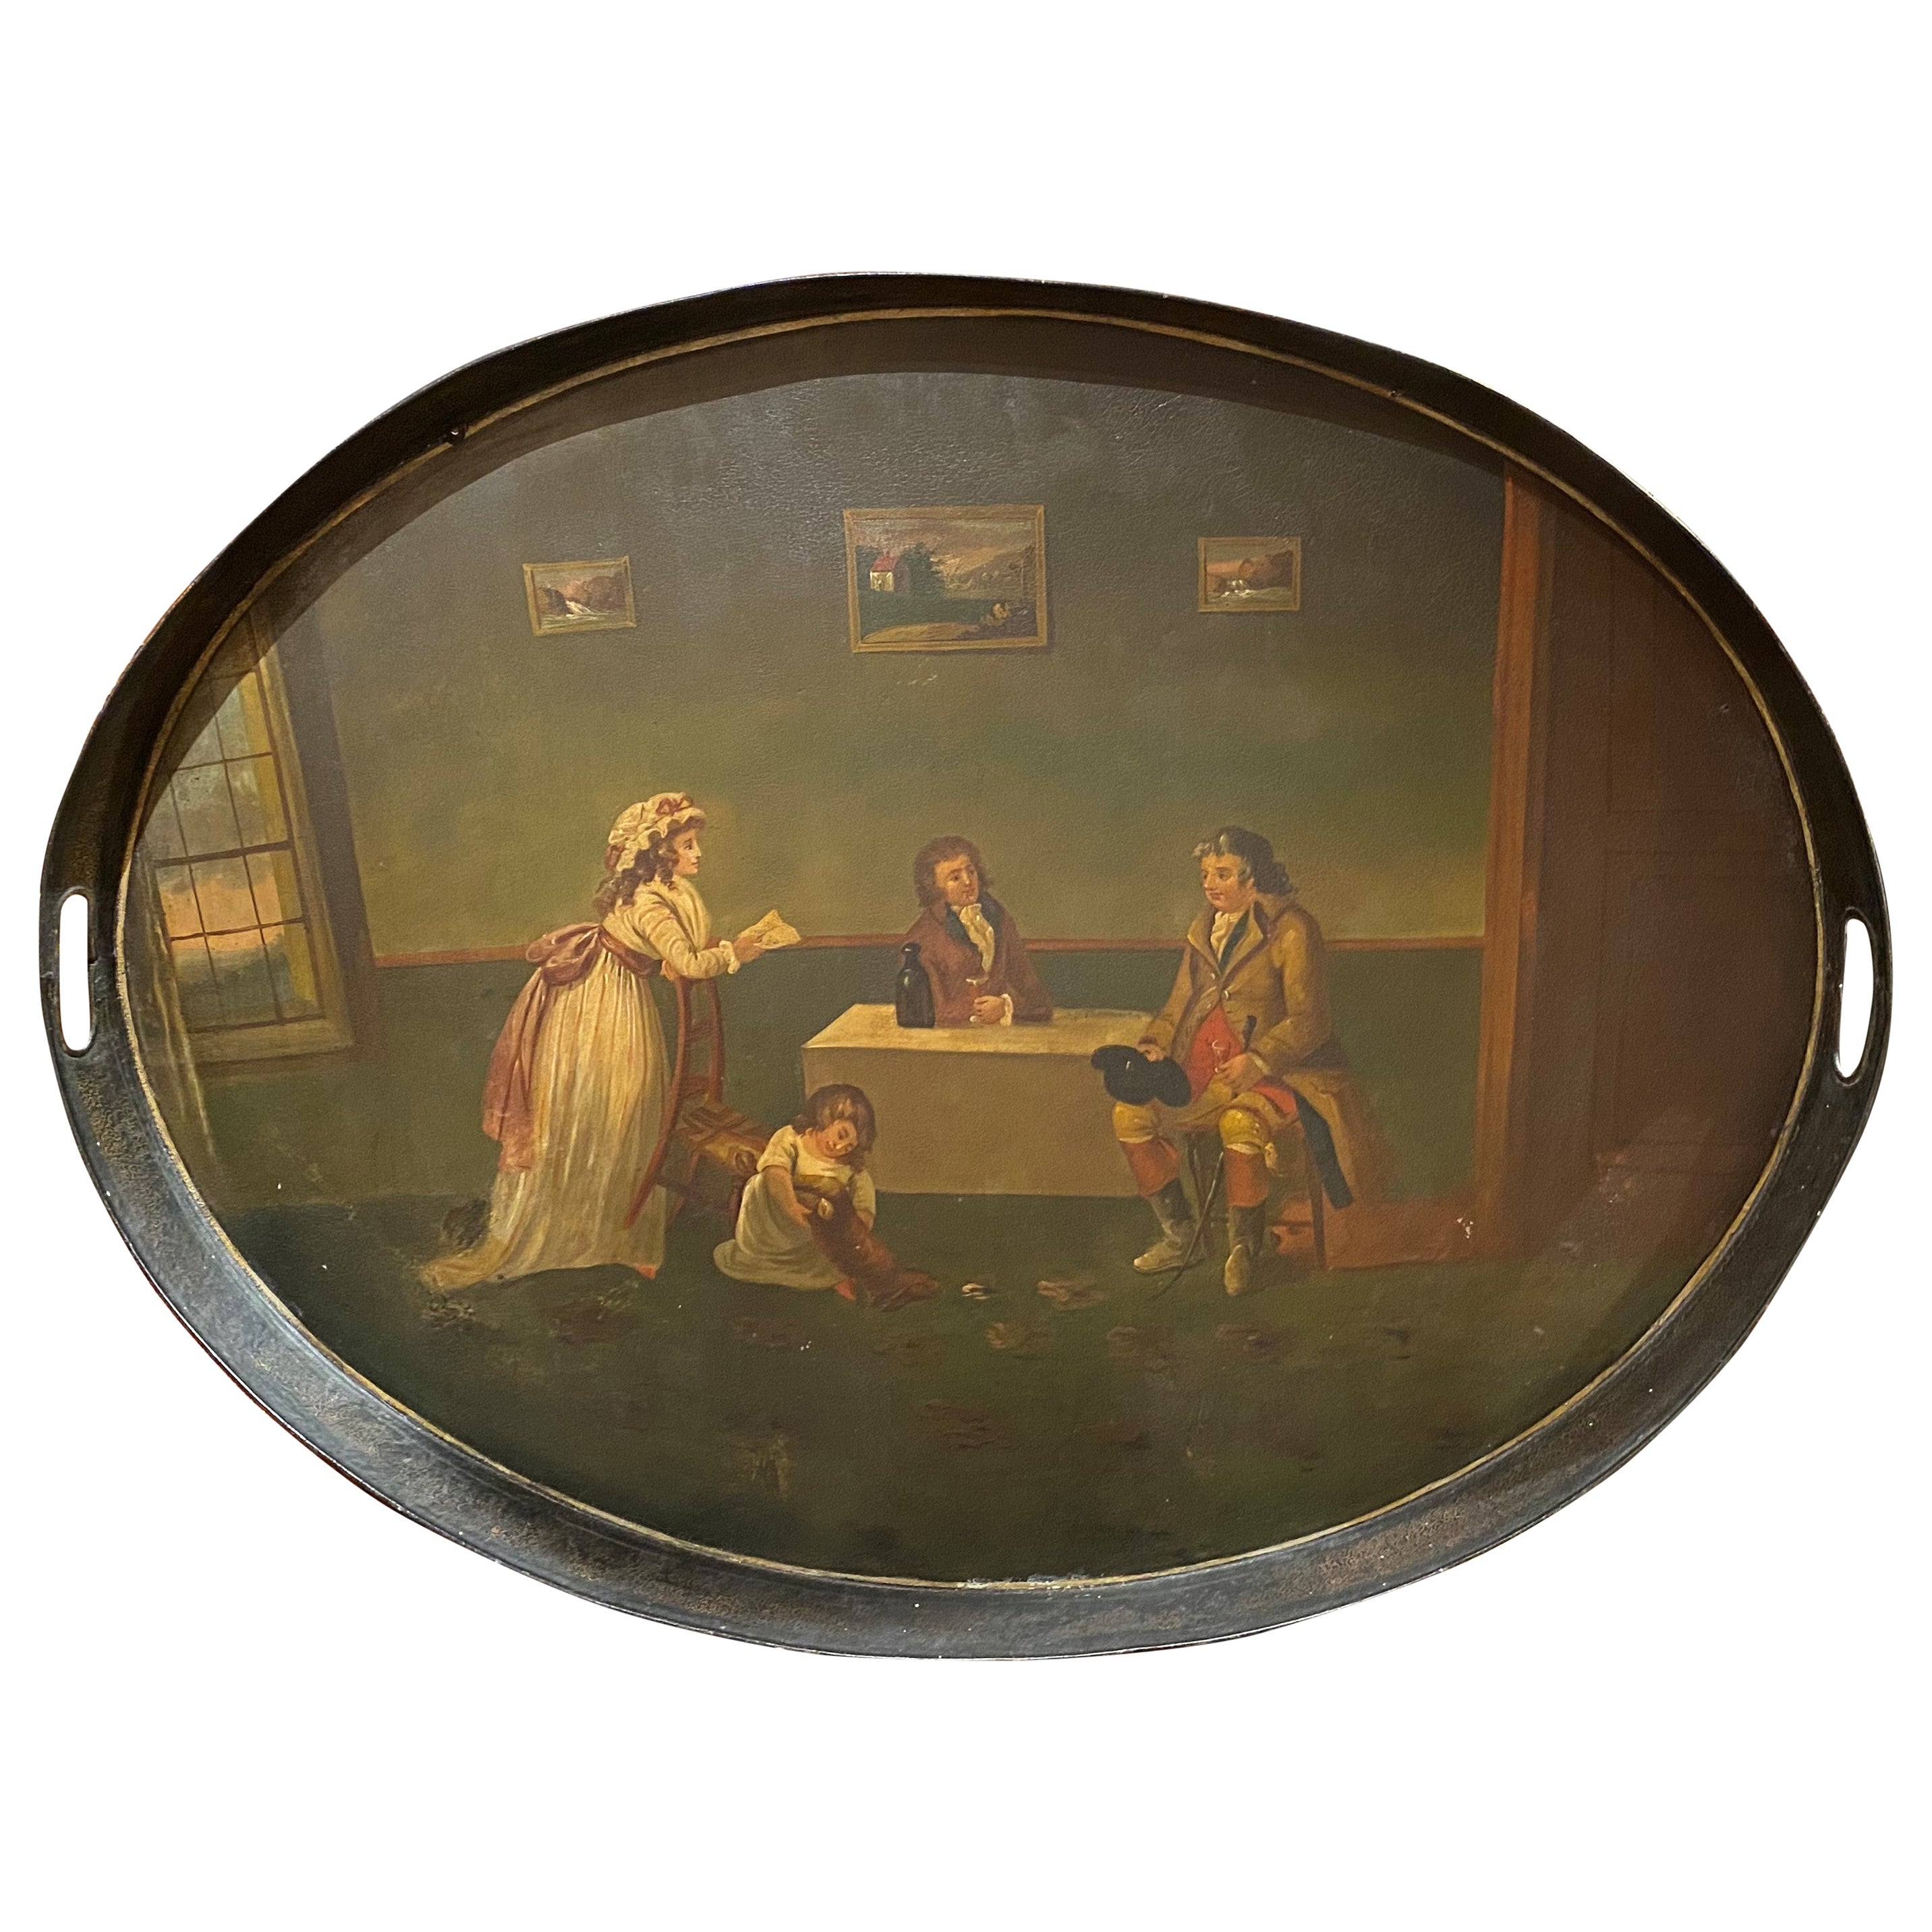 Early 19th Century Tole Painted Tray with Interior Genre Scene, Probably English